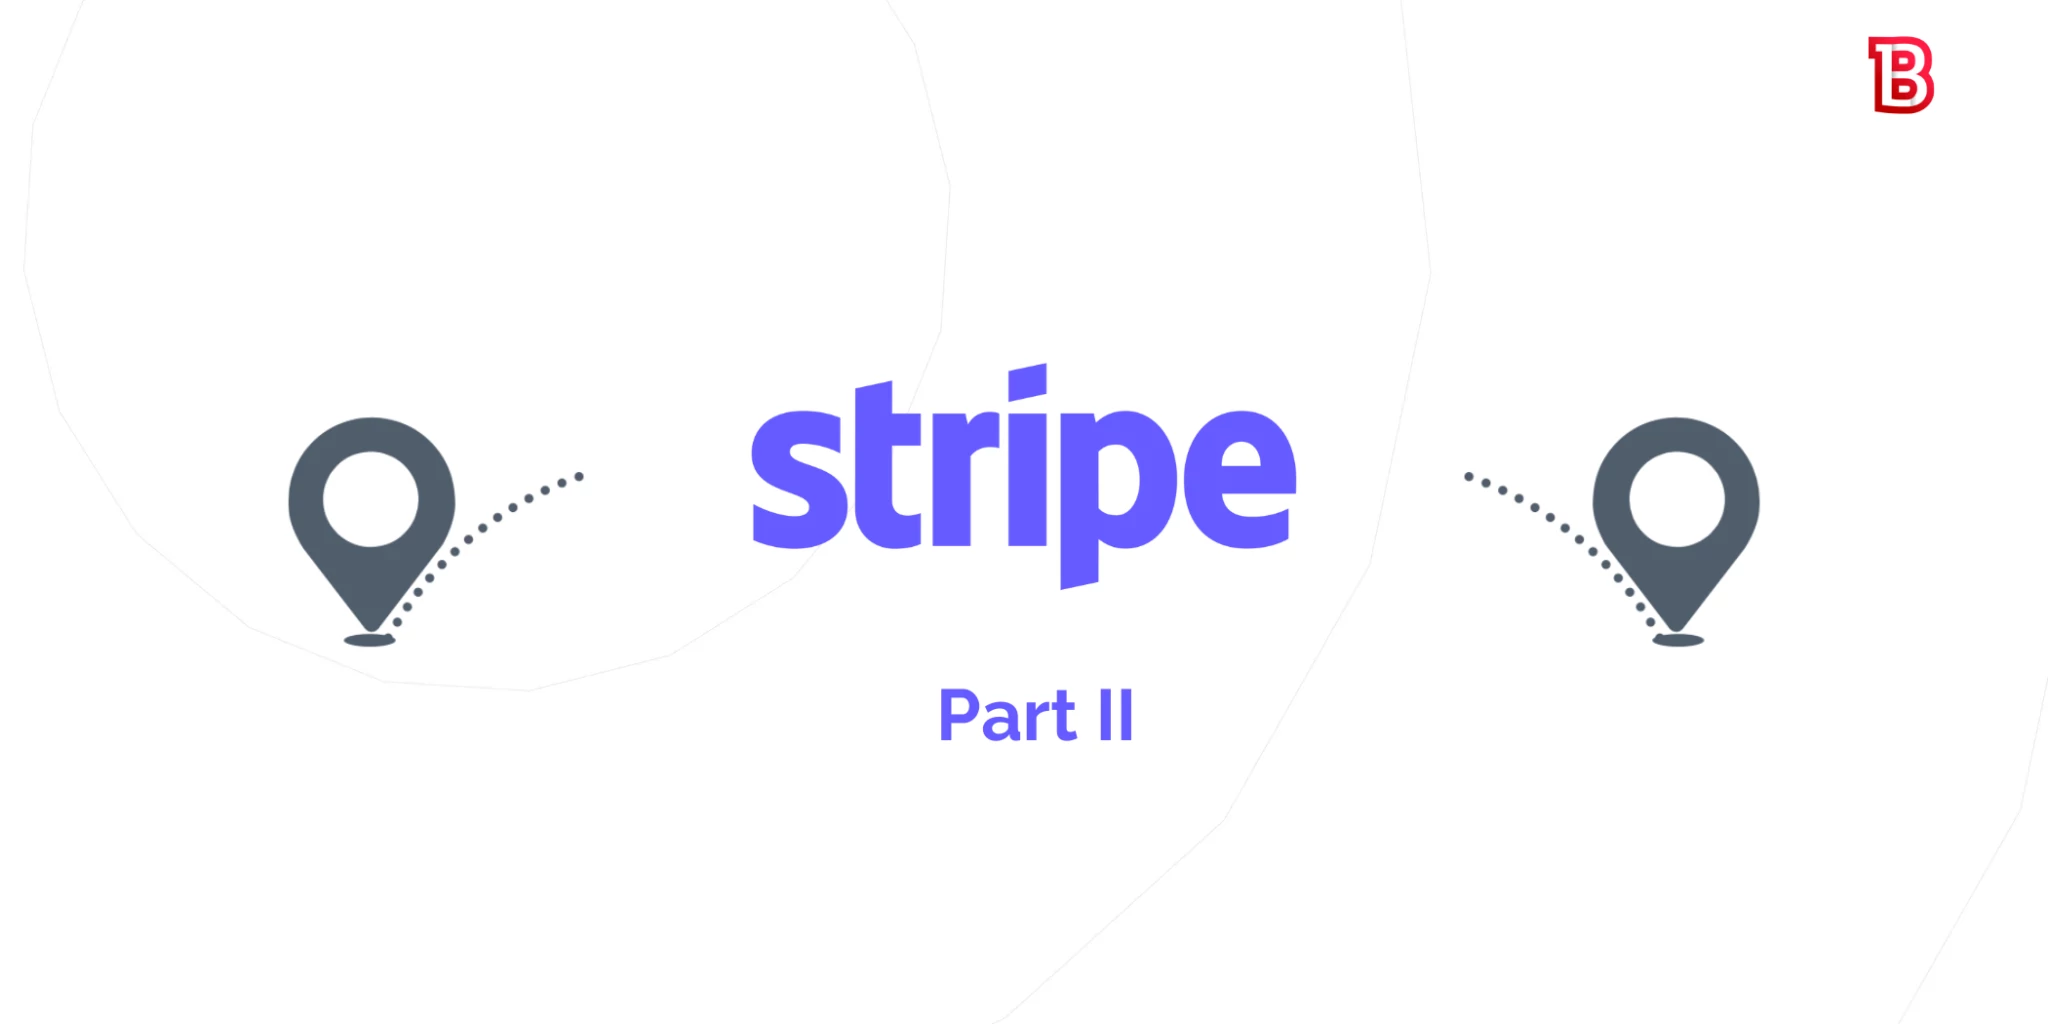 How to migrate an account from one country to another using Stripe? Part 2